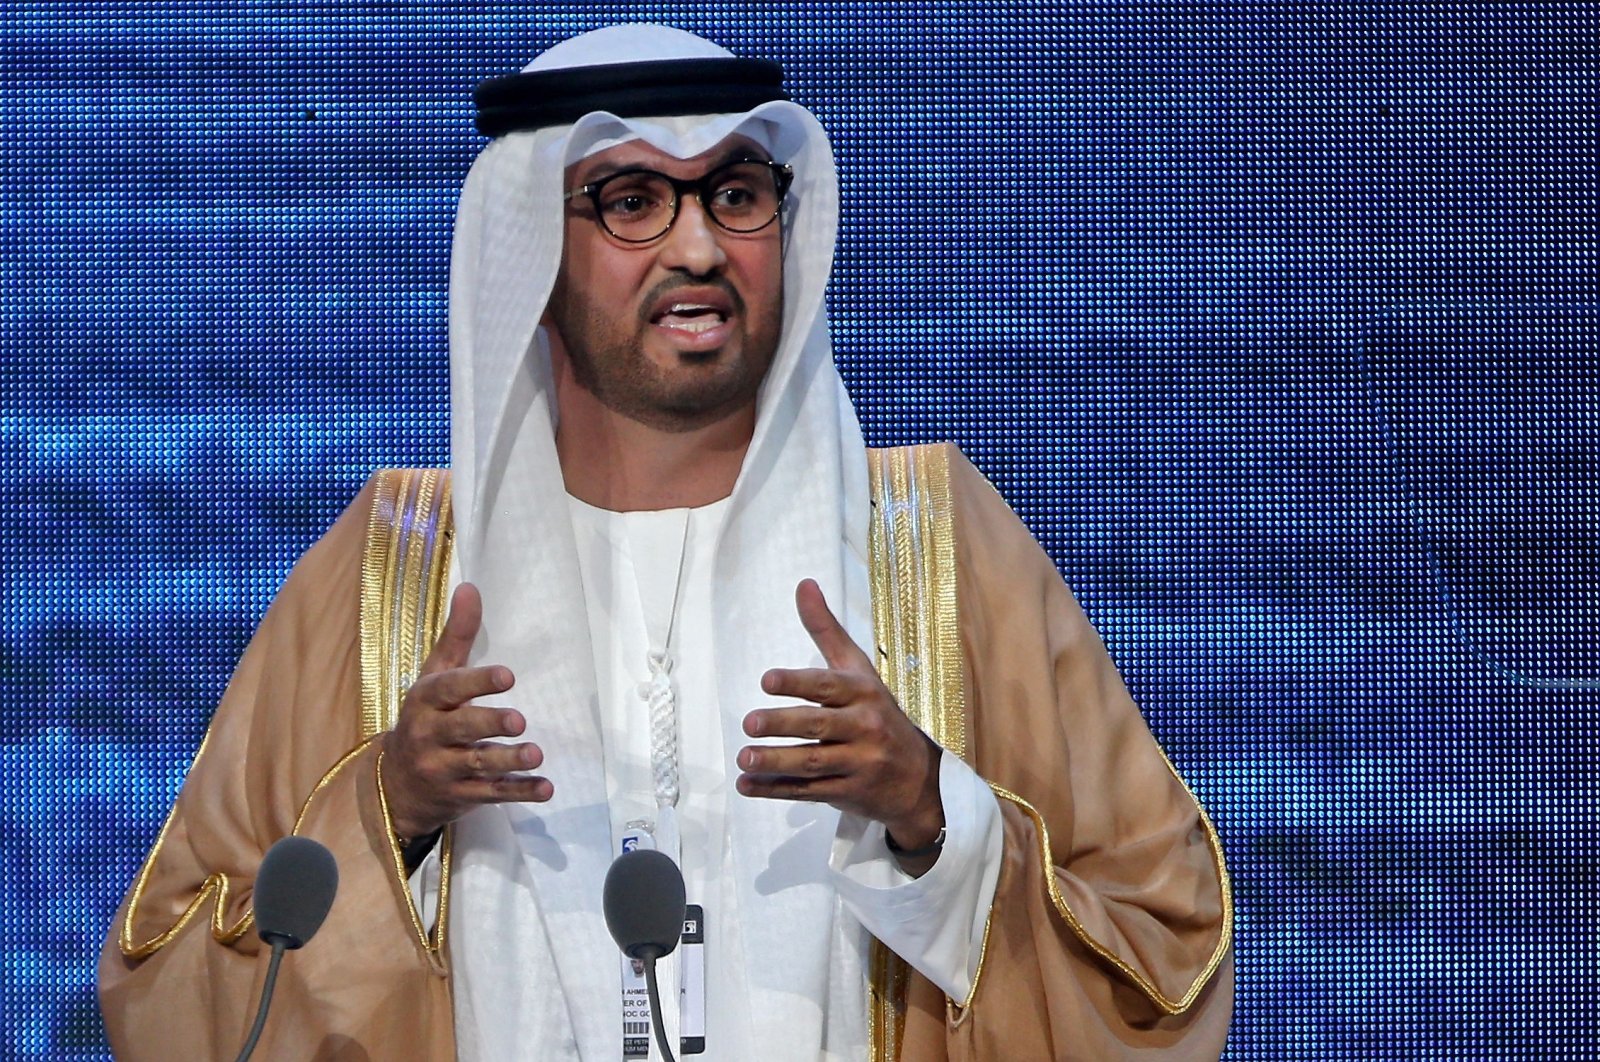 UAE&#039;s minister of state and CEO of the Abu Dhabi National Oil Company (ADNOC), Sultan Ahmed Al Jaber, addresses the opening ceremony of the Abu Dhabi International Petroleum Exhibition and Conference (ADIPEC) in Abu Dhabi, UAE, Nov. 11, 2019. (AFP Photo)